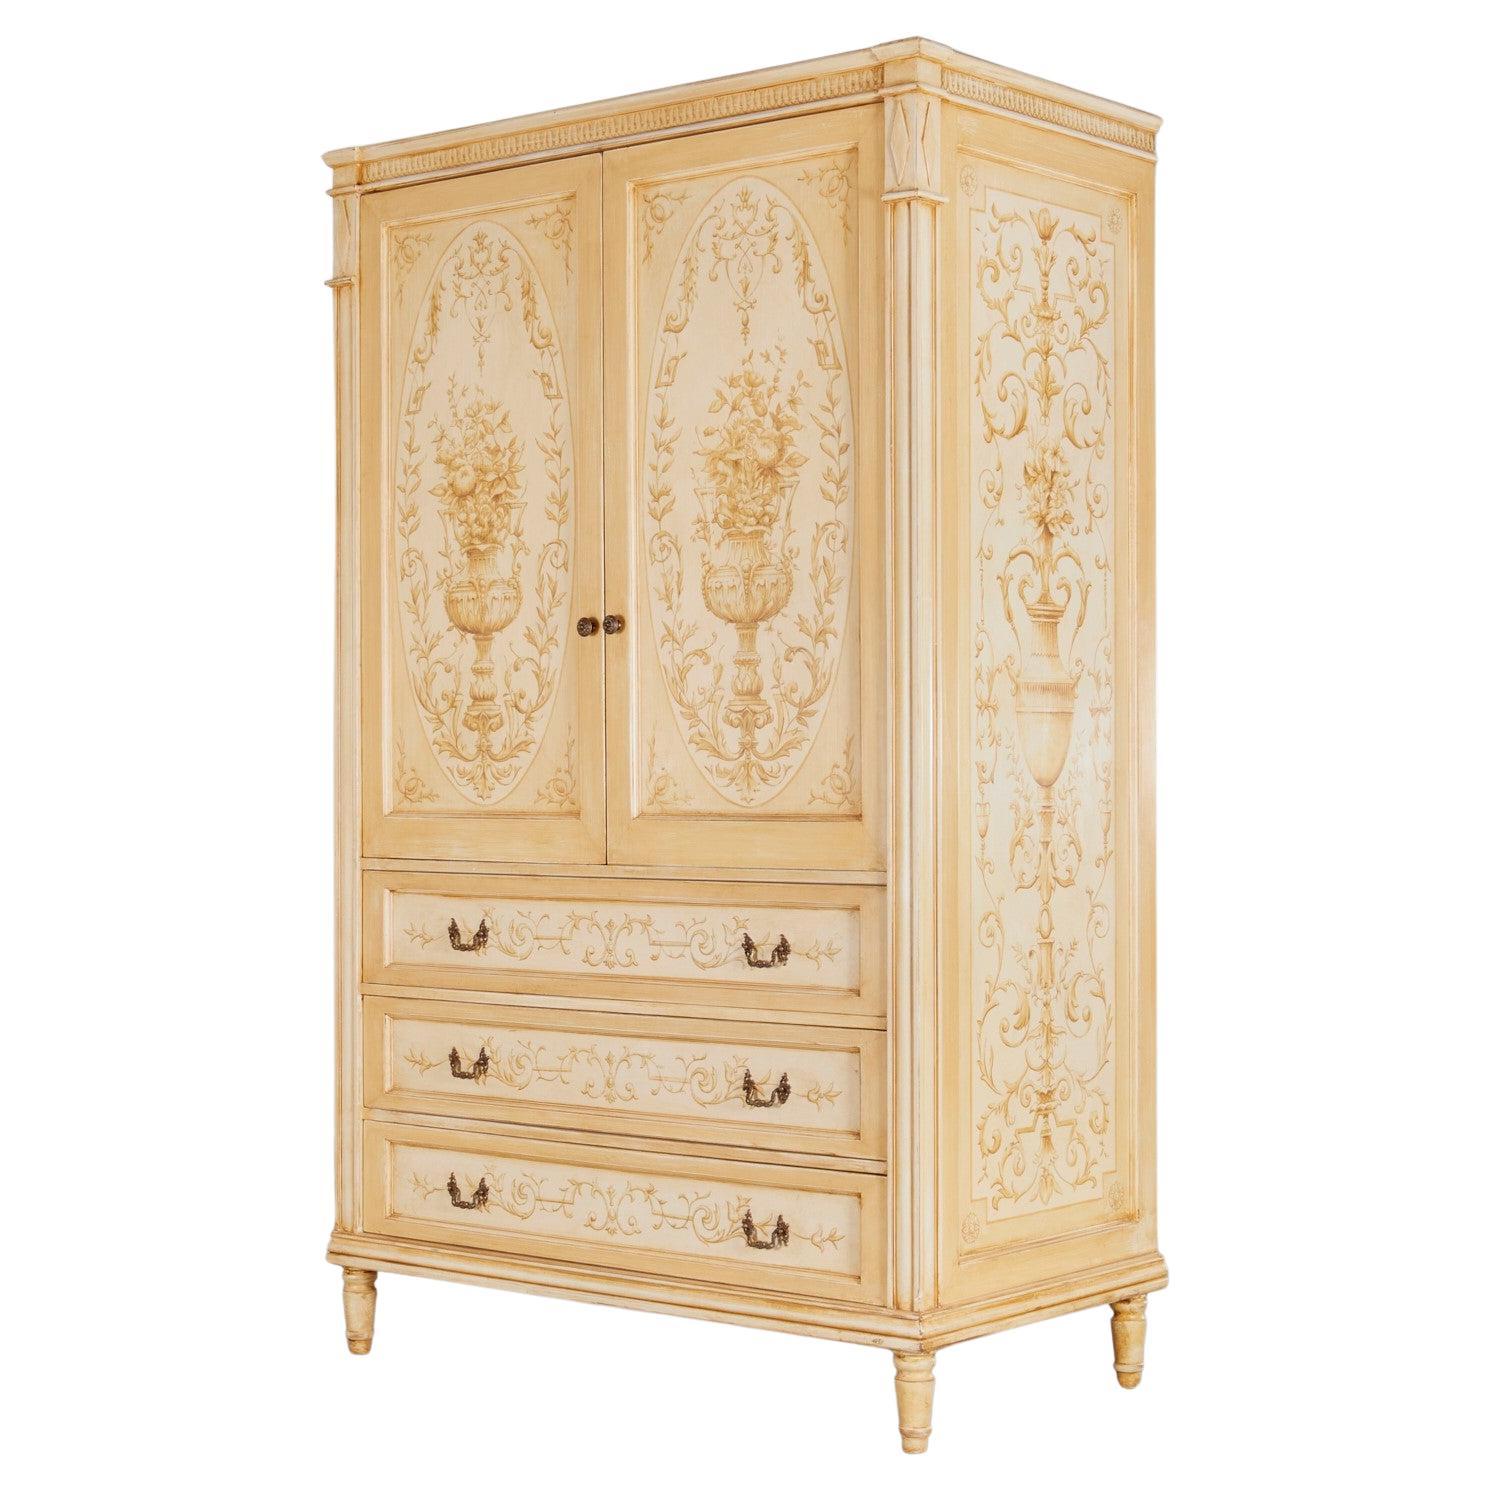 Custom Hand Painted Louis XVI Style Armoire by Ned Marshall Interiors, Inc. For Sale